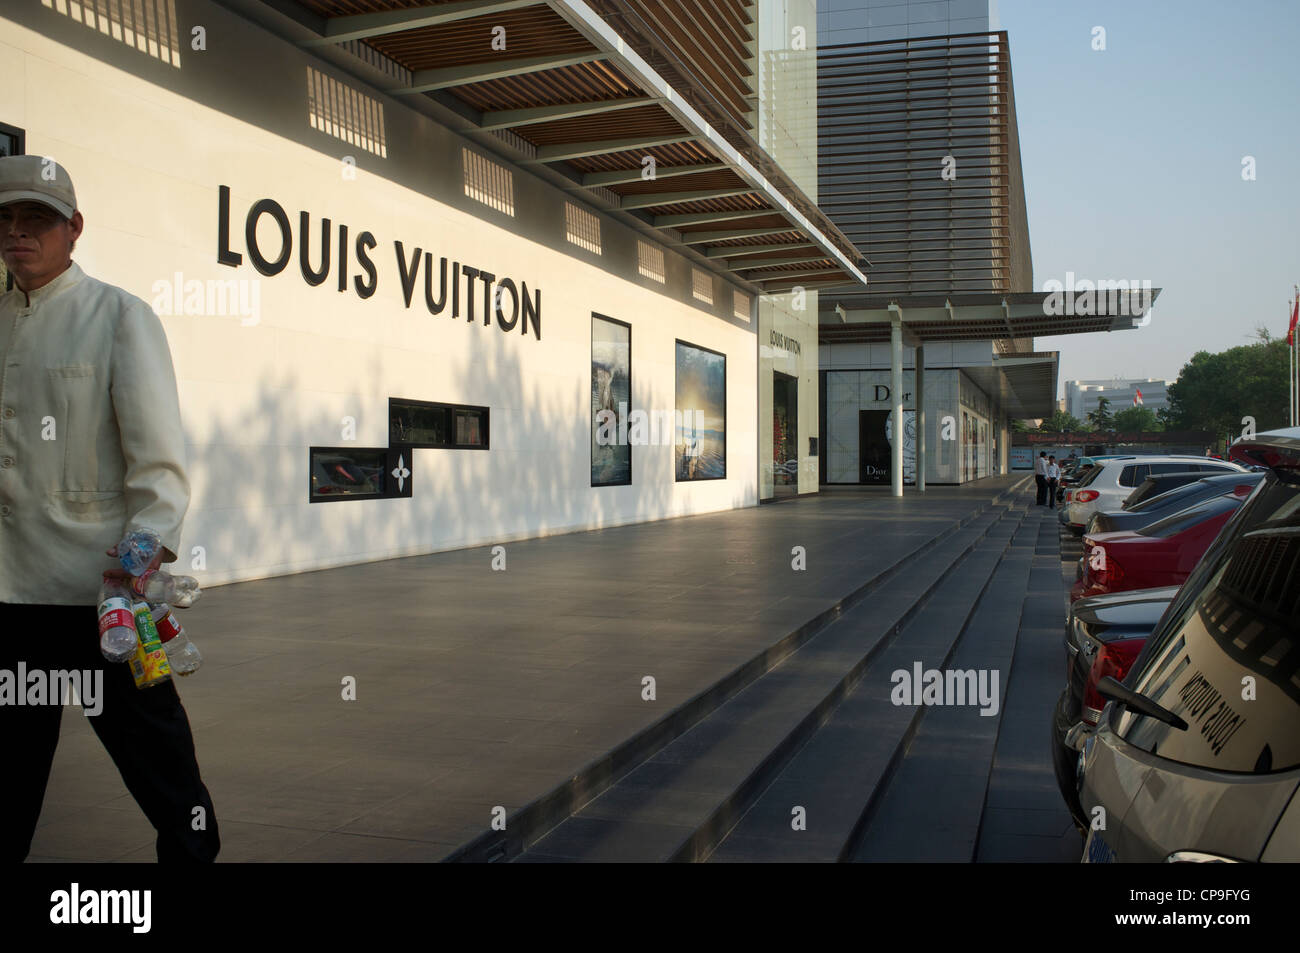 Louis Vuitton at Friendship Department Store, the first high-end luxury department store in Tianjin, China. 07-May-2012 Stock Photo